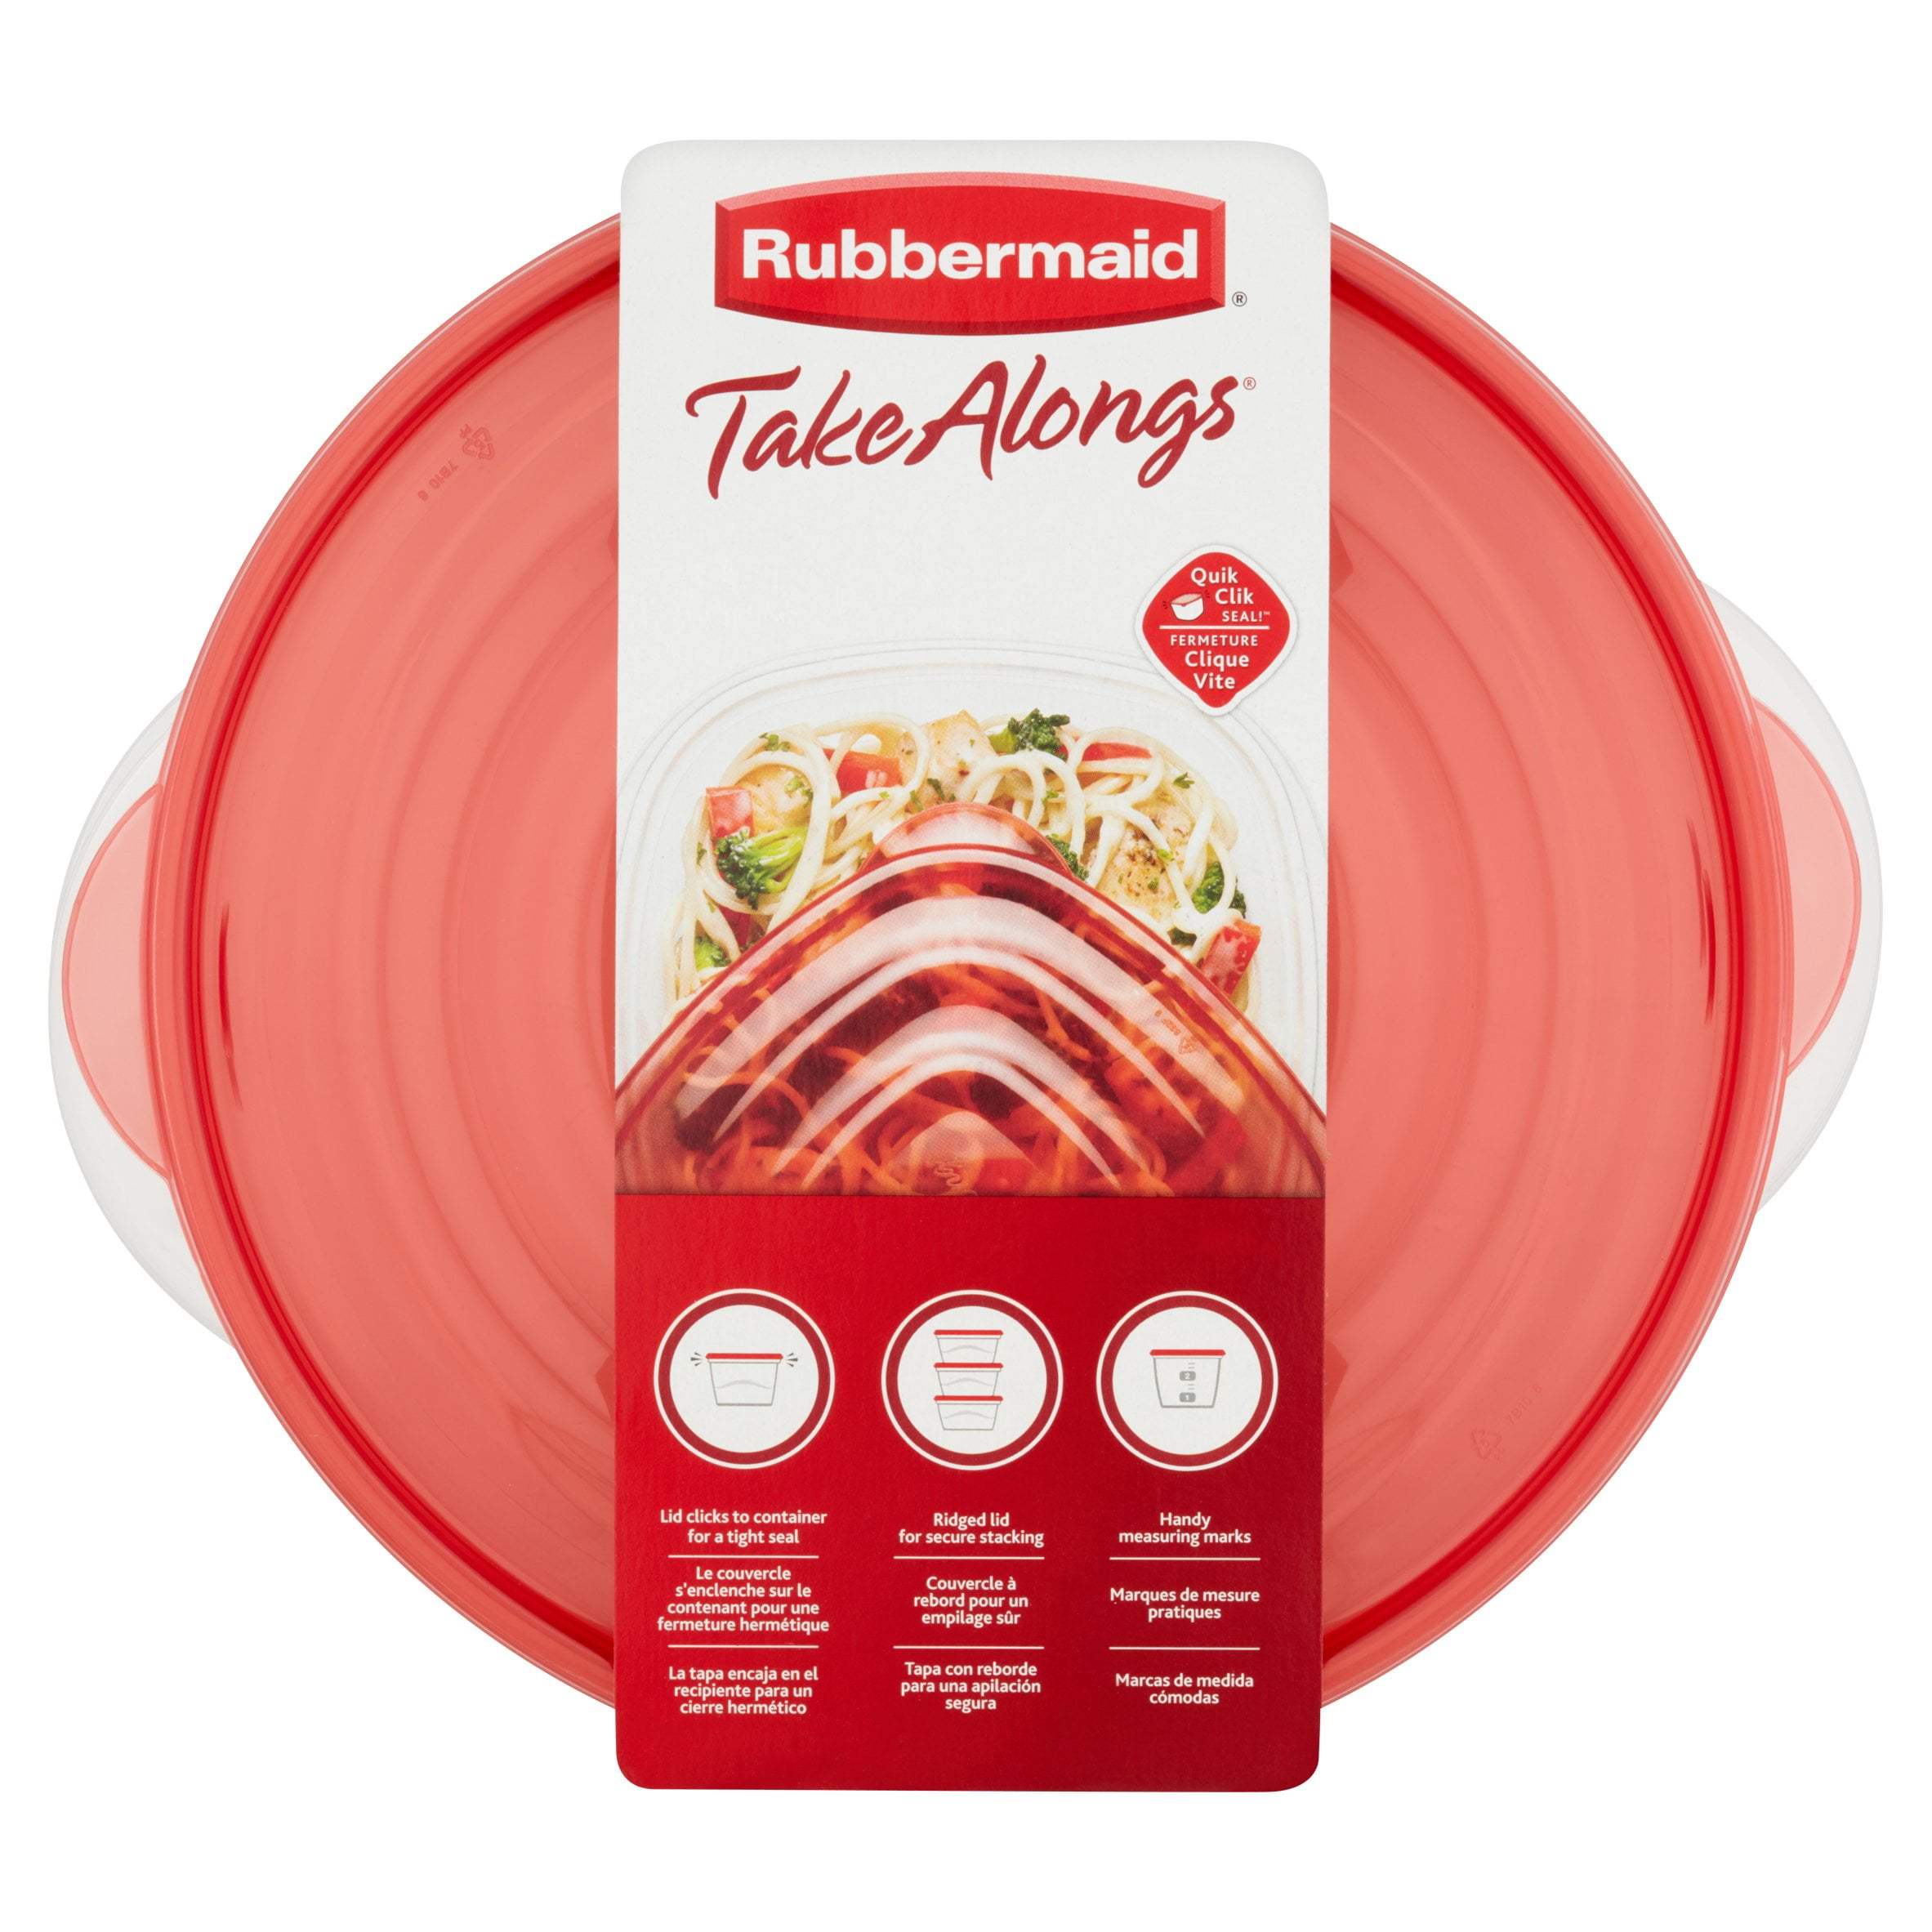 TakeAlongs® Serving Bowl Food Storage Containers, 15.7 Cup, 2 Count